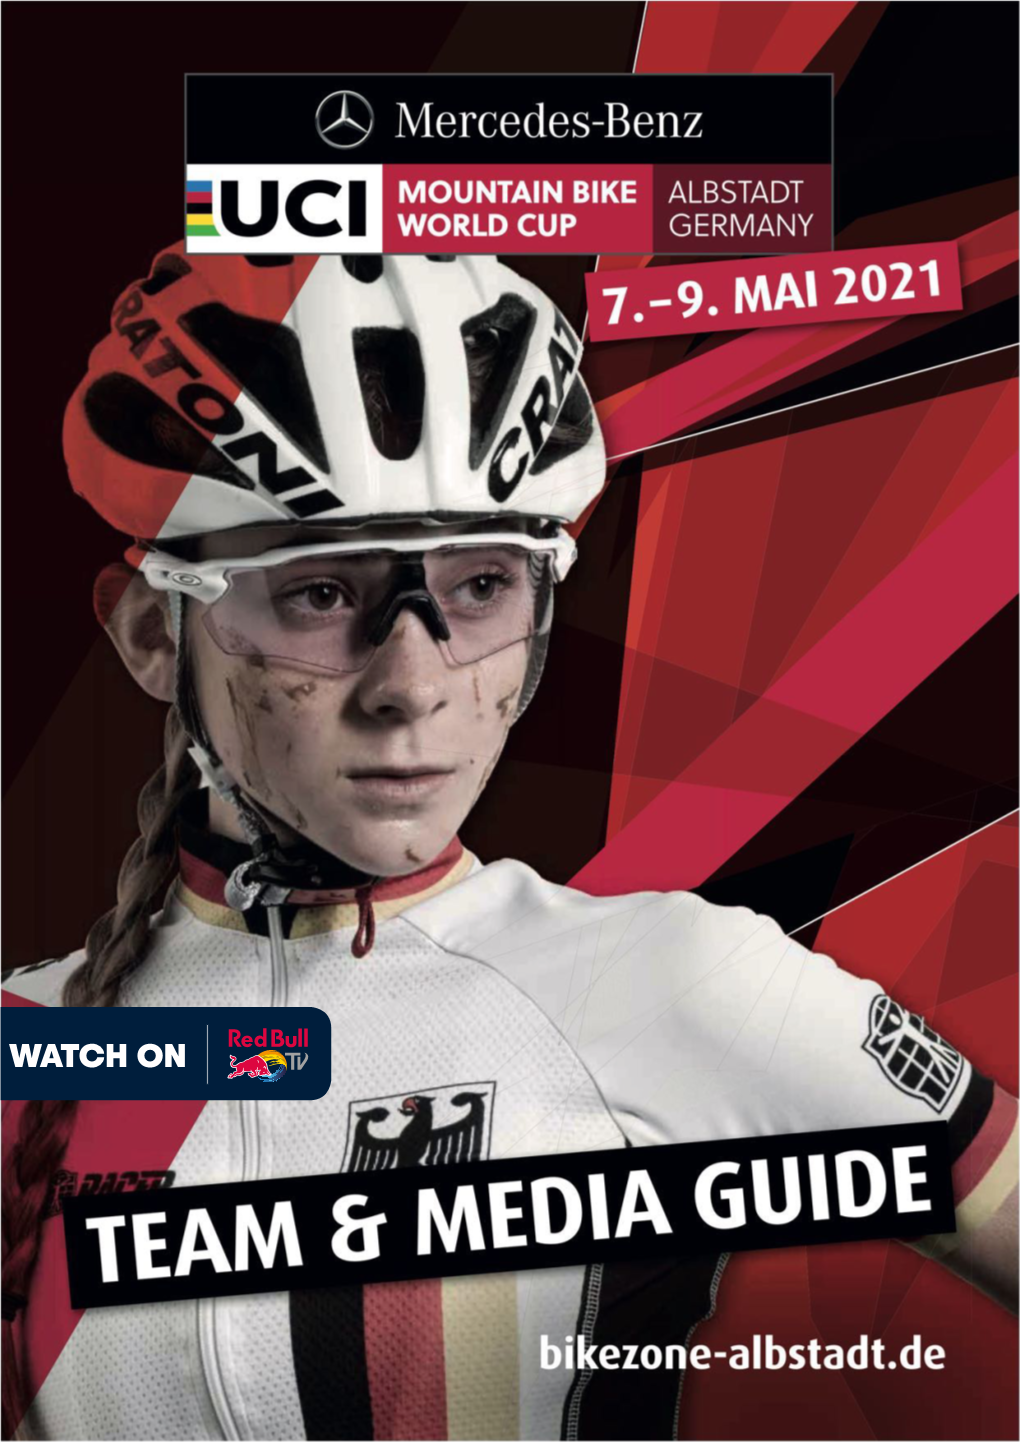 Watch on 2021 Uci Mountain Bike World Cup Team-Guide| 2 Event Information